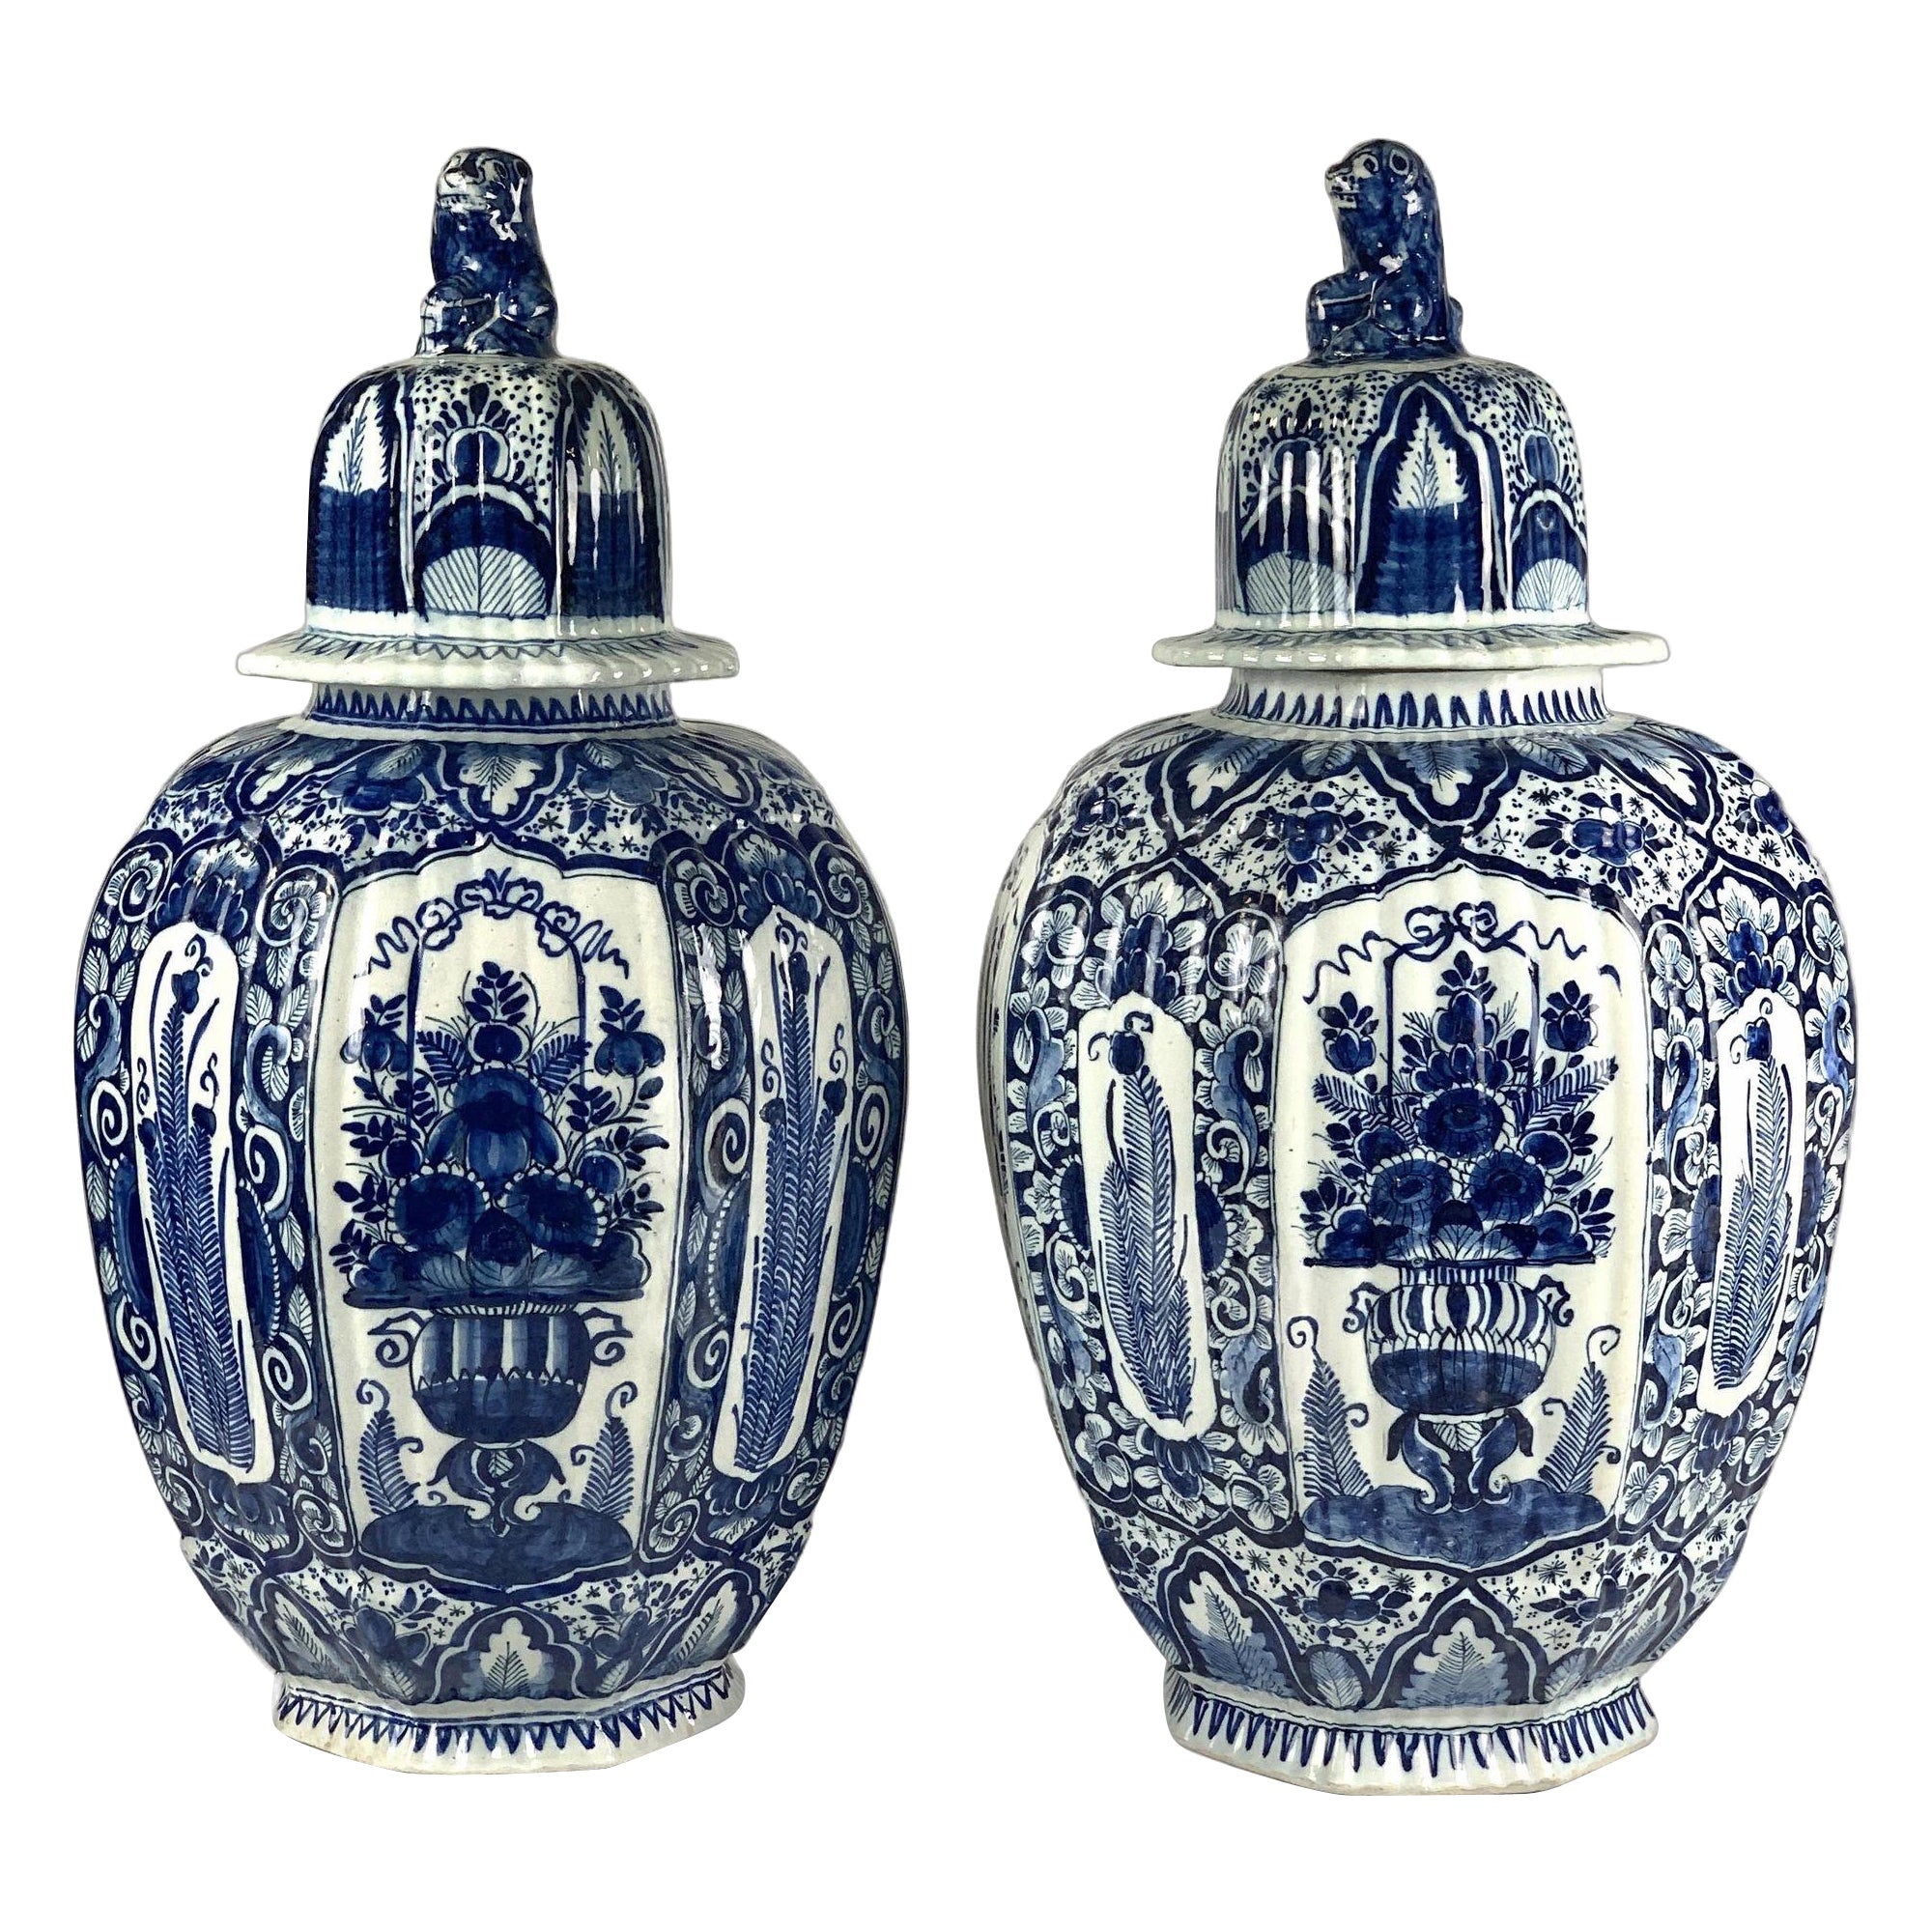 Large Blue and White Delft Jars 18th Century Netherlands Circa 1780